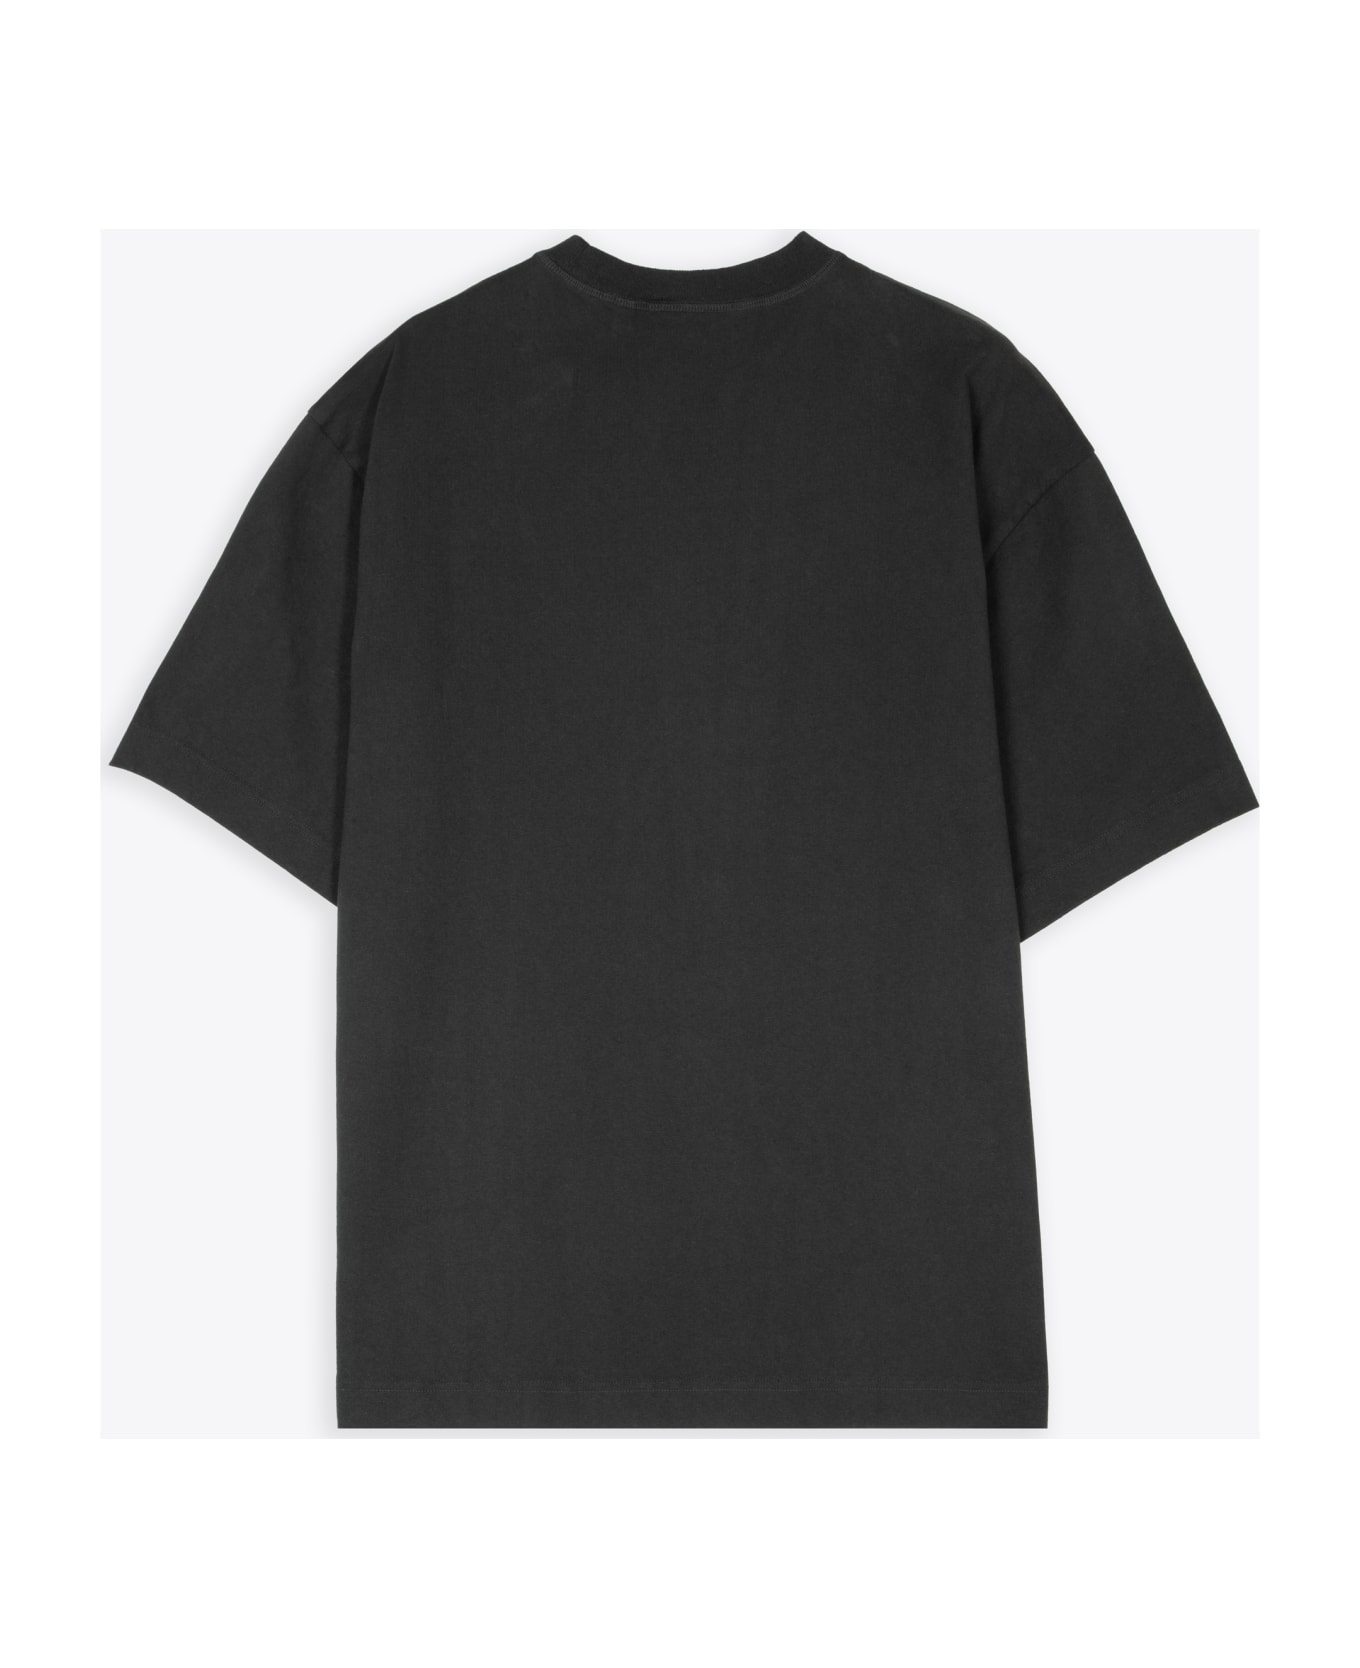 Axel Arigato Sketch T-shirt Faded black t-shirt with italic logo print - Essential T-shirt - Antracite